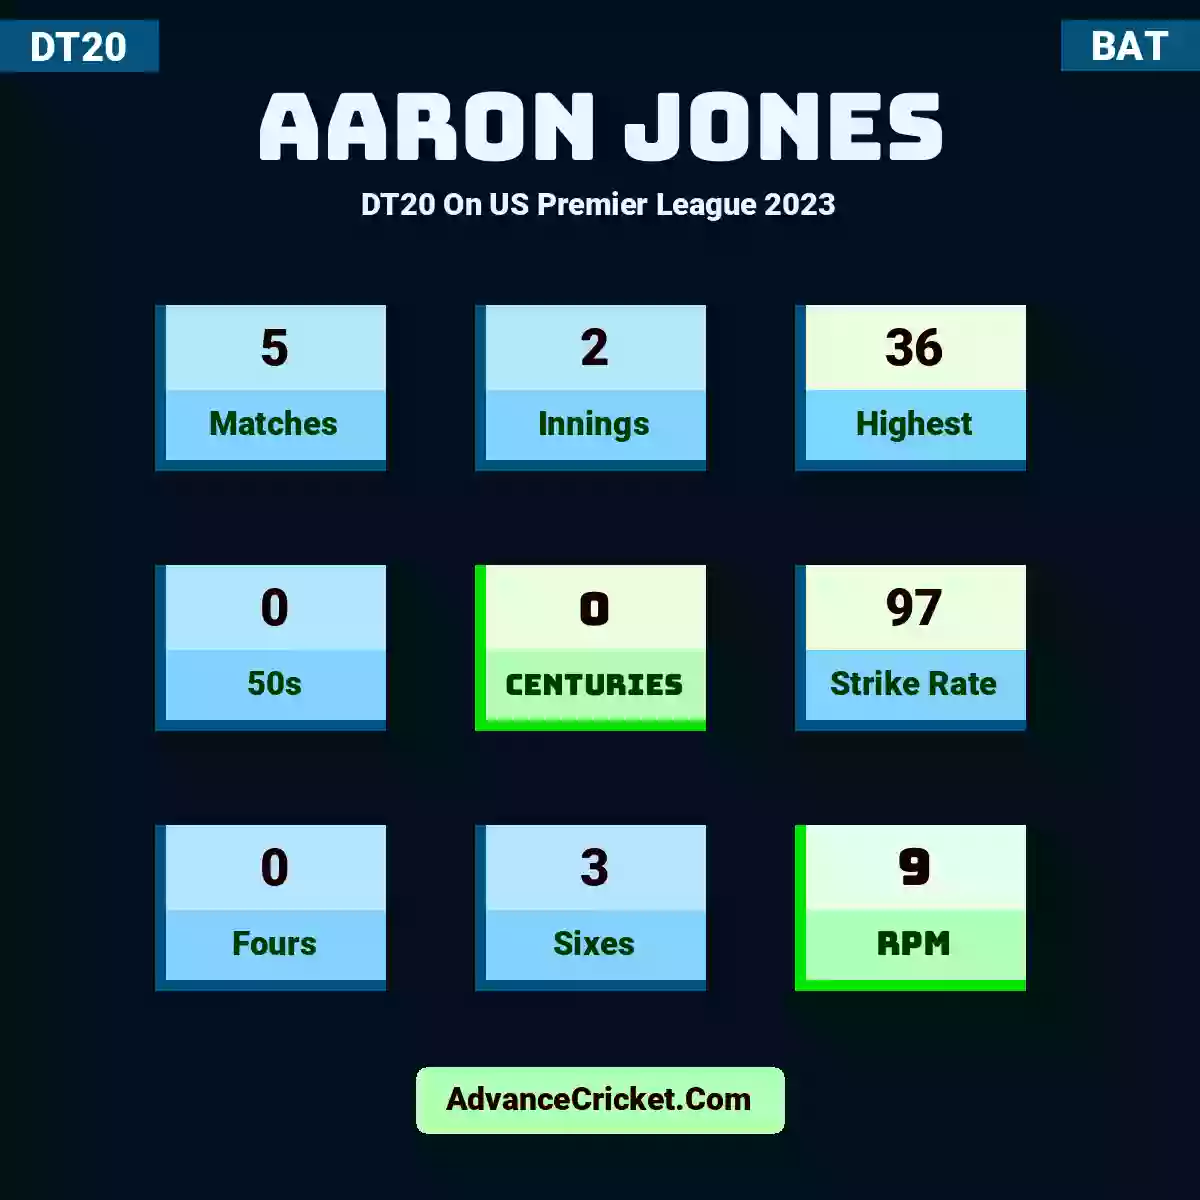 Aaron Jones DT20  On US Premier League 2023, Aaron Jones played 5 matches, scored 36 runs as highest, 0 half-centuries, and 0 centuries, with a strike rate of 97. A.Jones hit 0 fours and 3 sixes, with an RPM of 9.